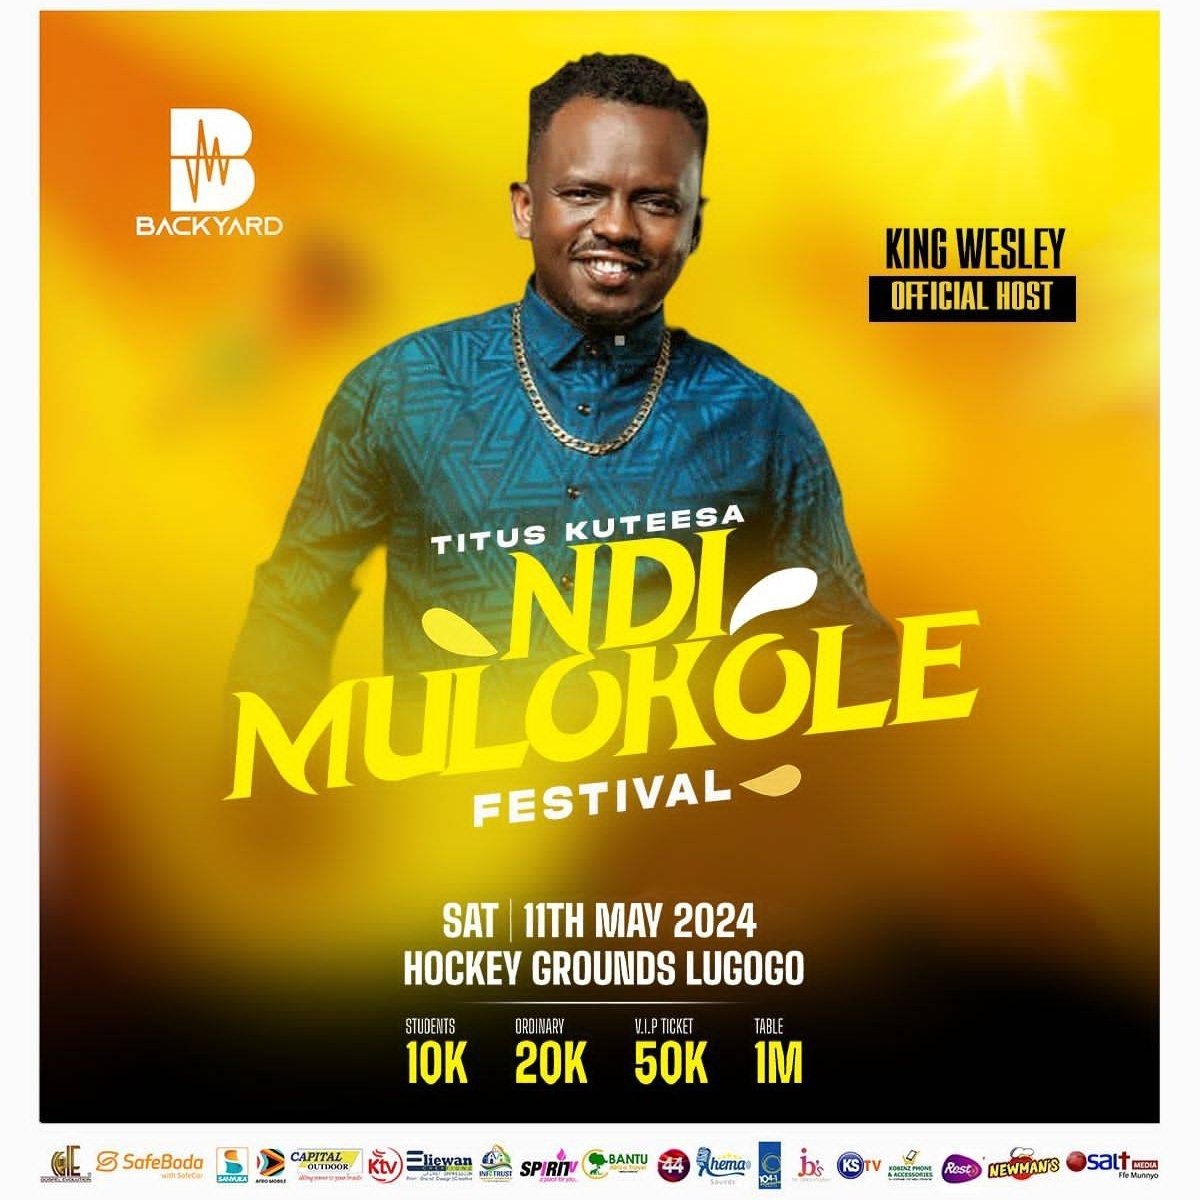 As long as you see the king of Radio just know it's going to be massive so hope you got your ticket and dancing shoes ready💃💃💃💃💃💃💃💃💃
#NdiMulukoleFestival
#RoyalArmyUganda